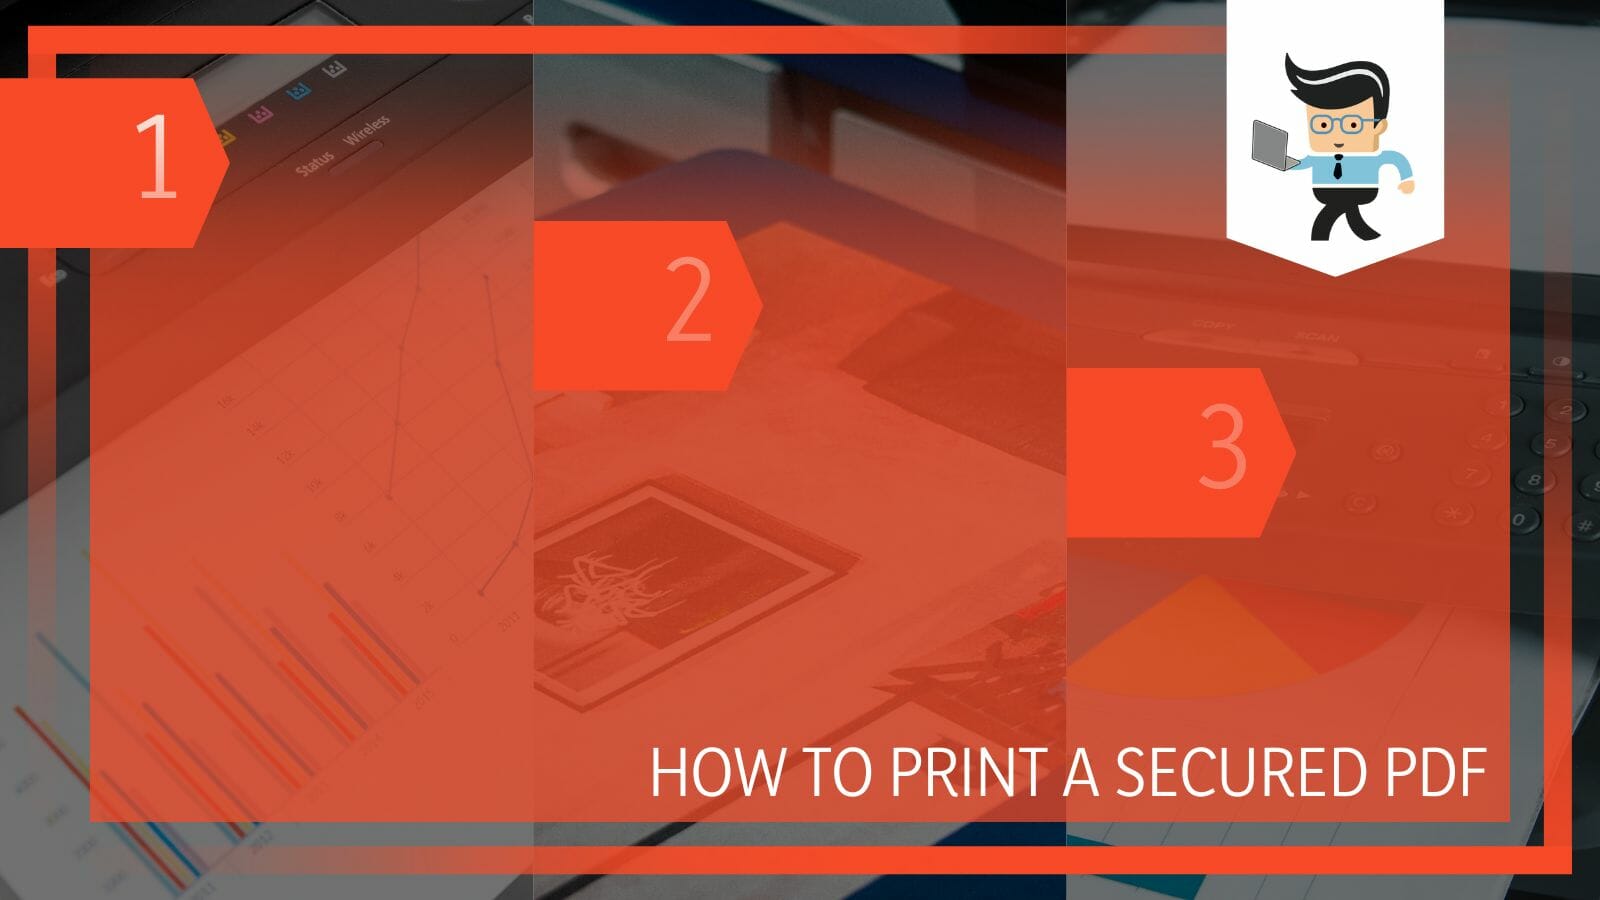 How to Print a Secured PDF